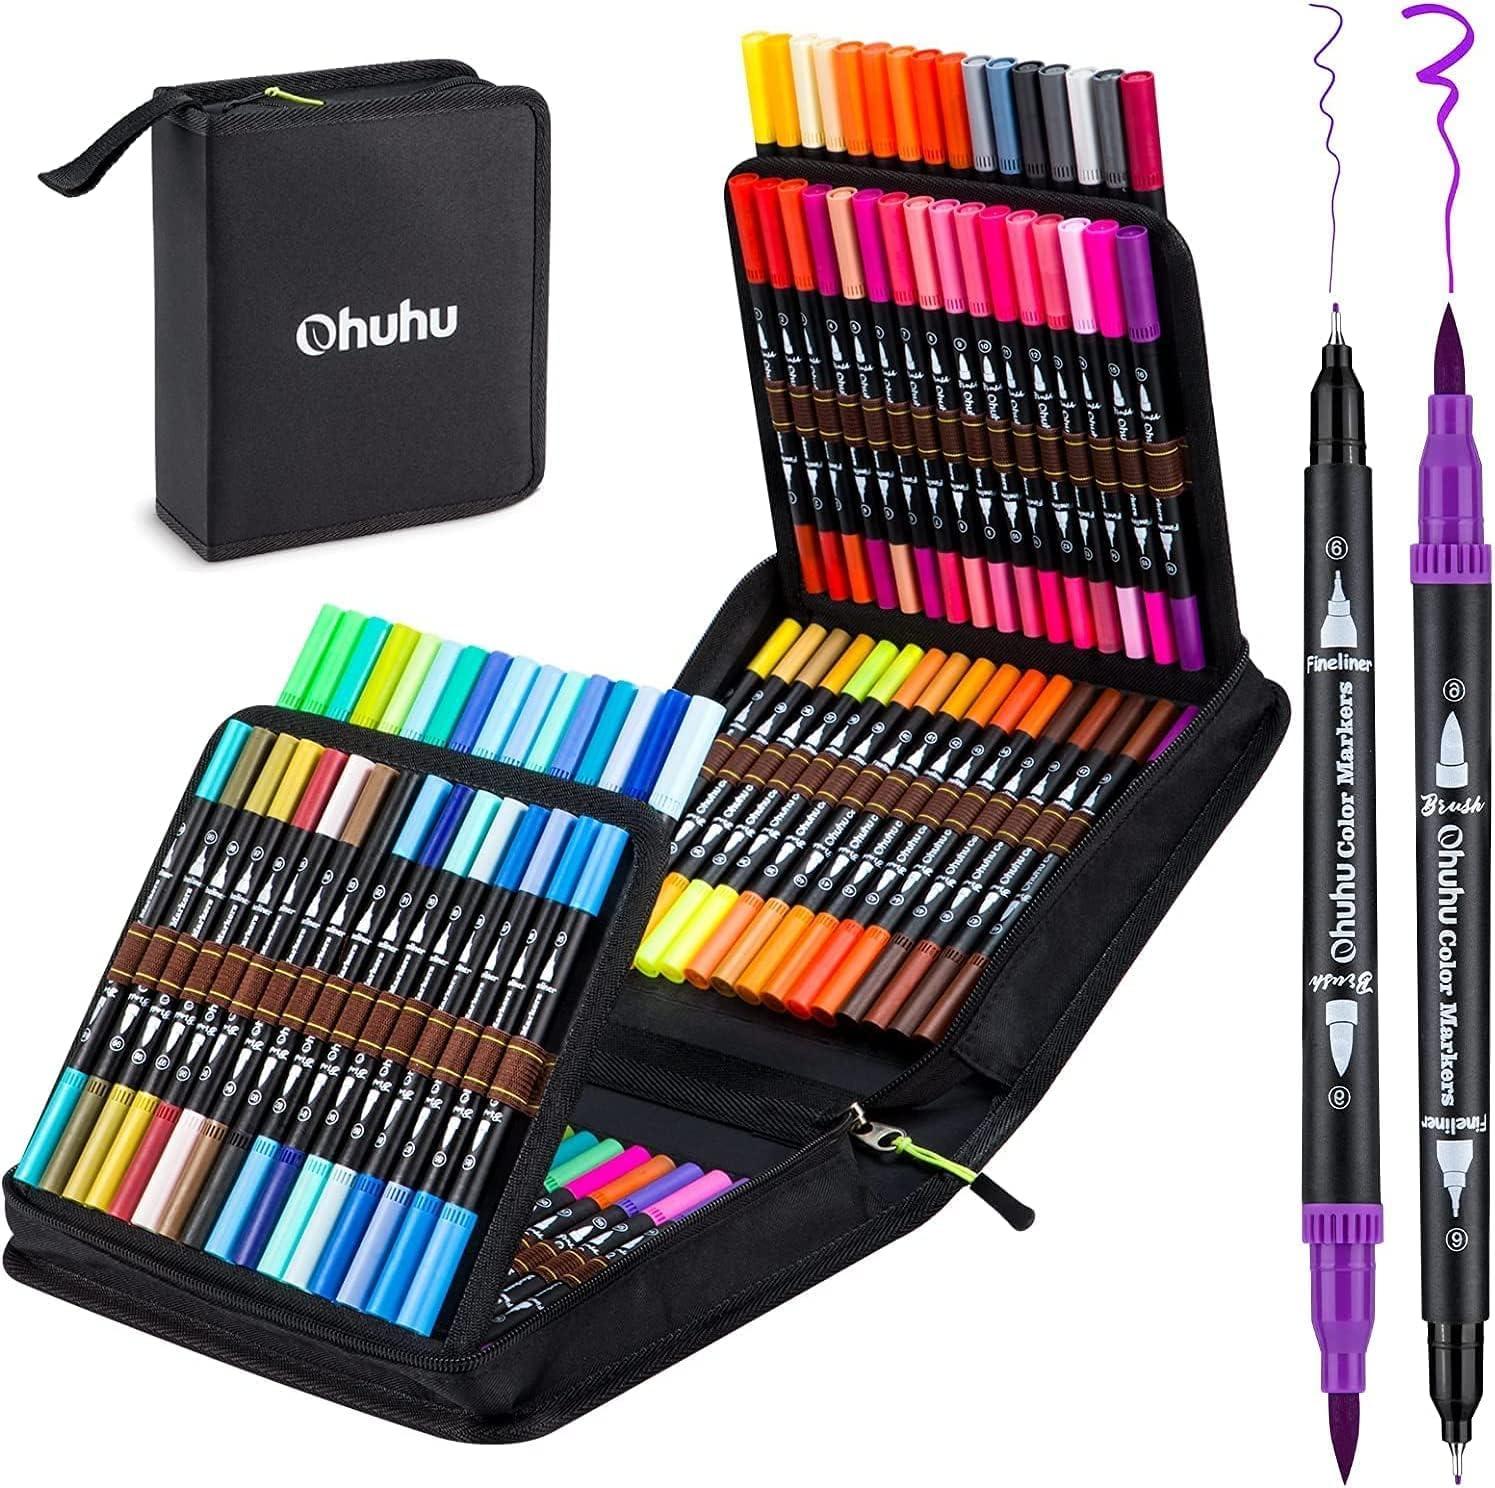 ohuhu store 100 color ohuhu dual brush markers brush fineliner tips water-based art marker for adult coloring